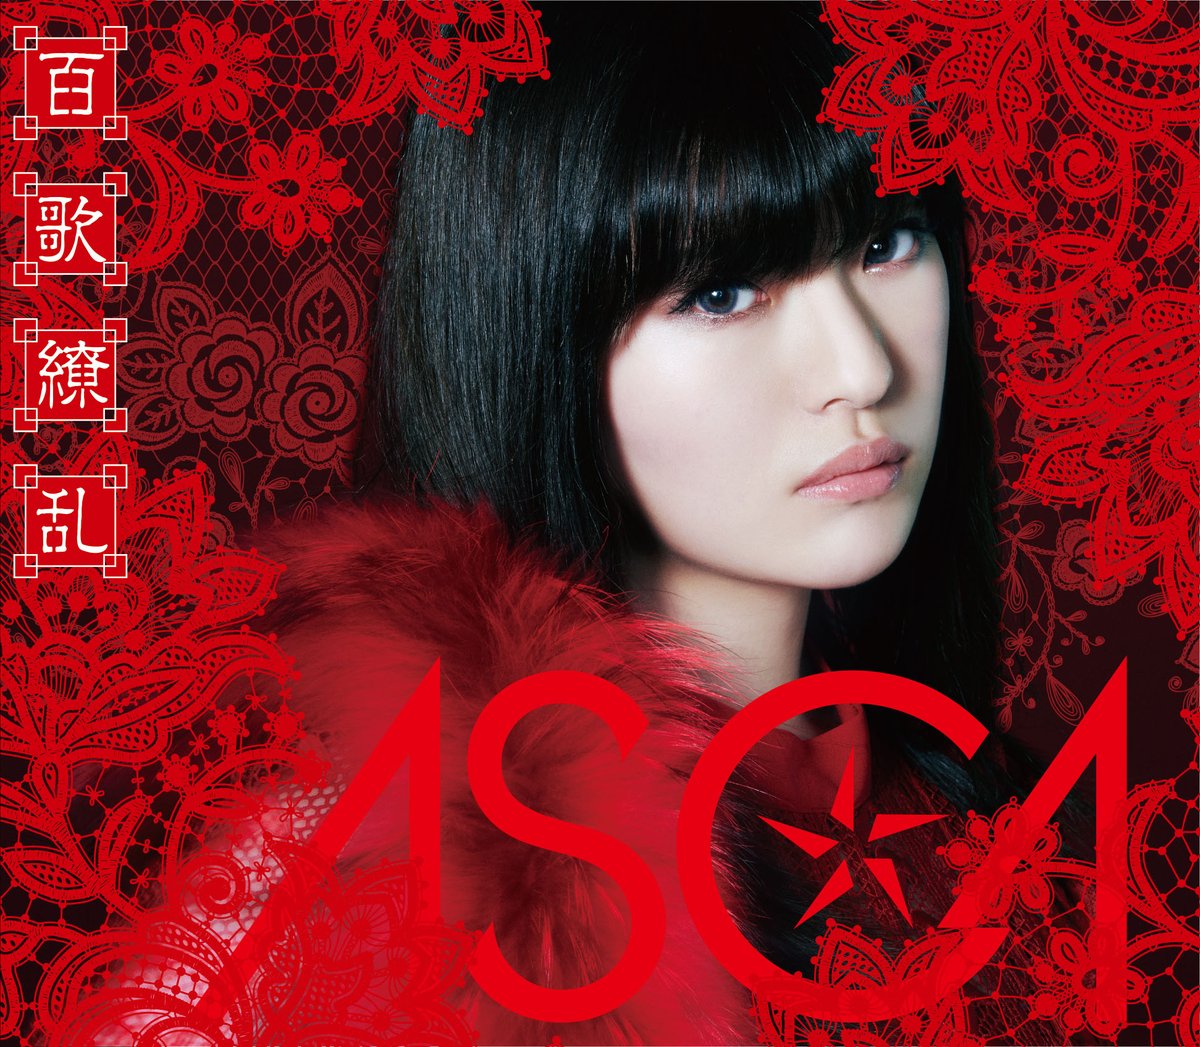 Cover for『ASCA - Selfrontier』from the release『Hyakka Ryouran』